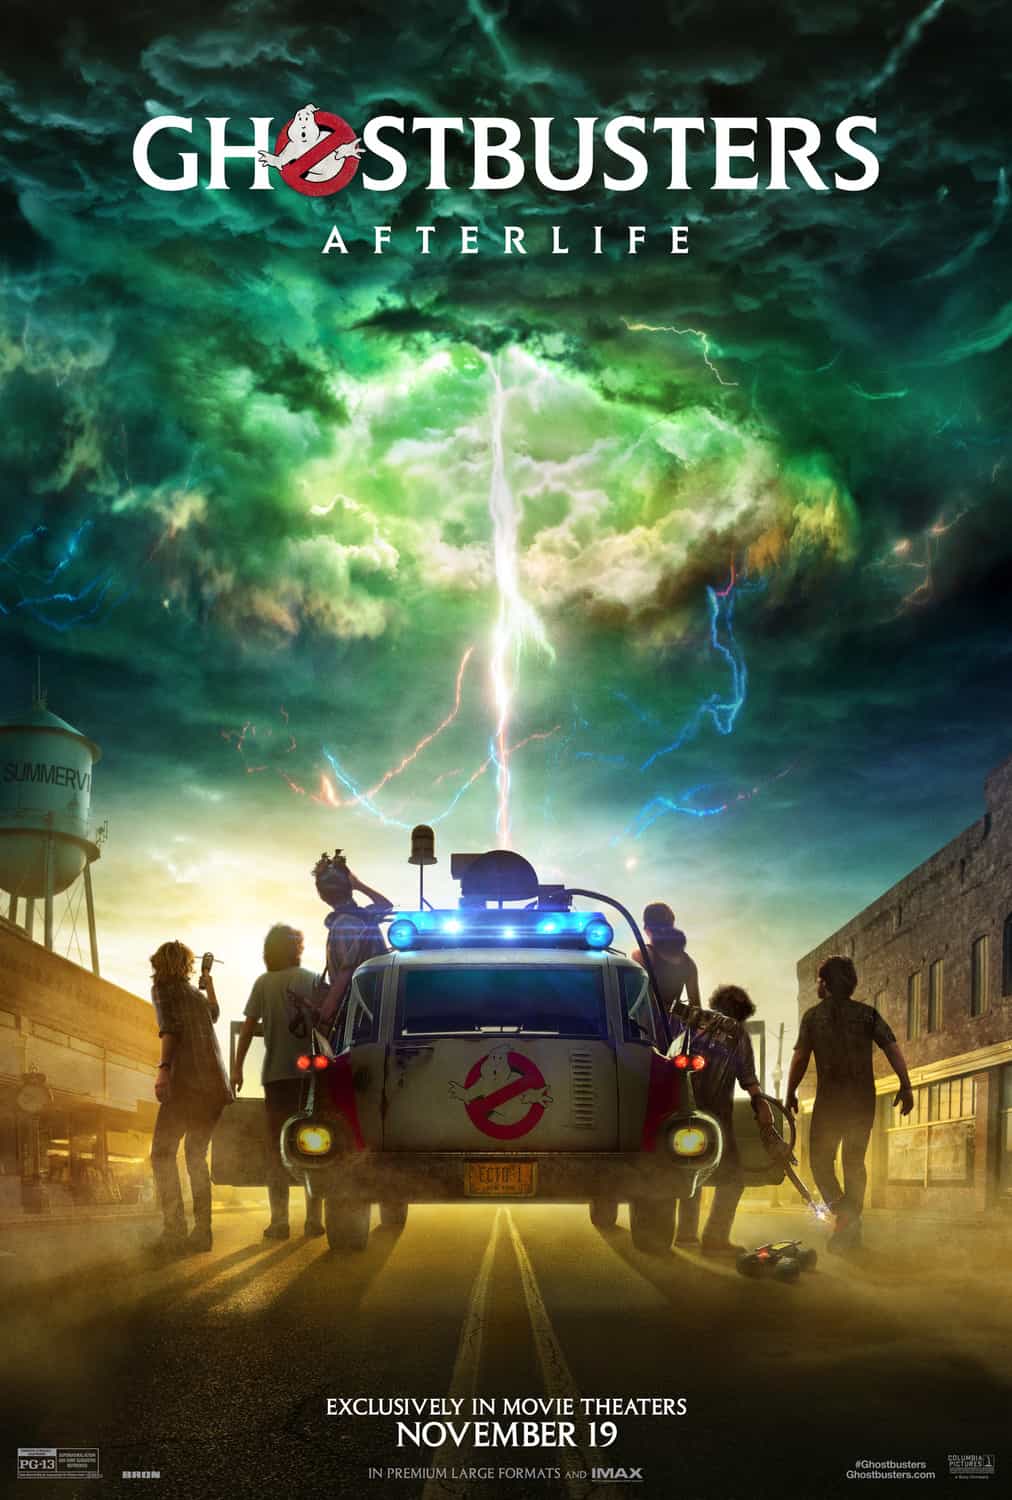 New trailer for Ghostbusters: Afterlife which hits you with the nostalgia stick hard